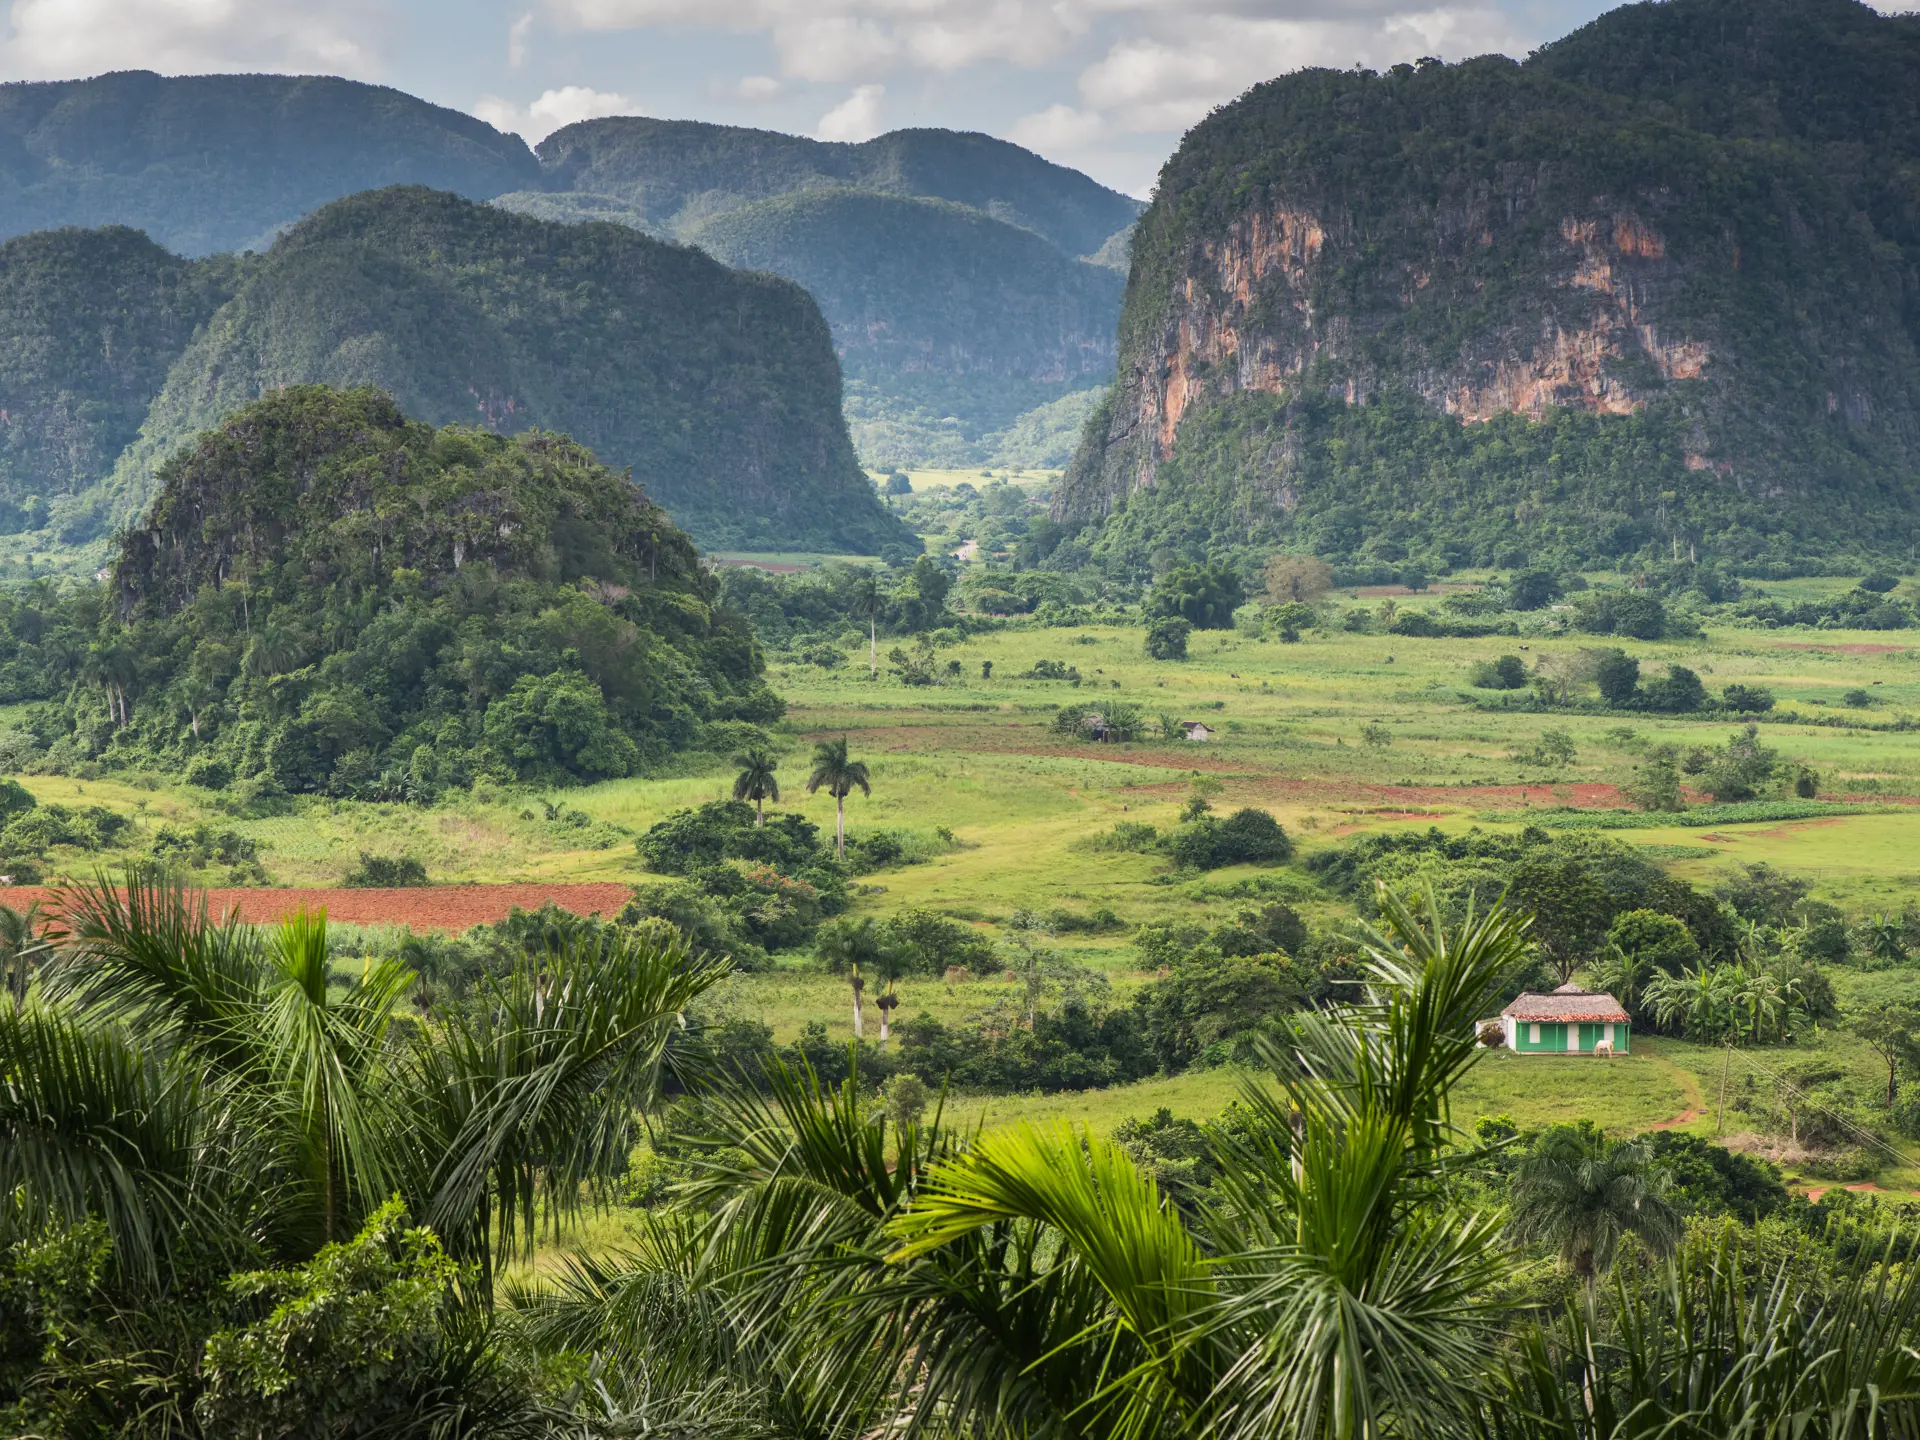 shutterstock_323530409 Panoramic view over landscape with mogotes in Vinales Valley ,Cuba.jpg